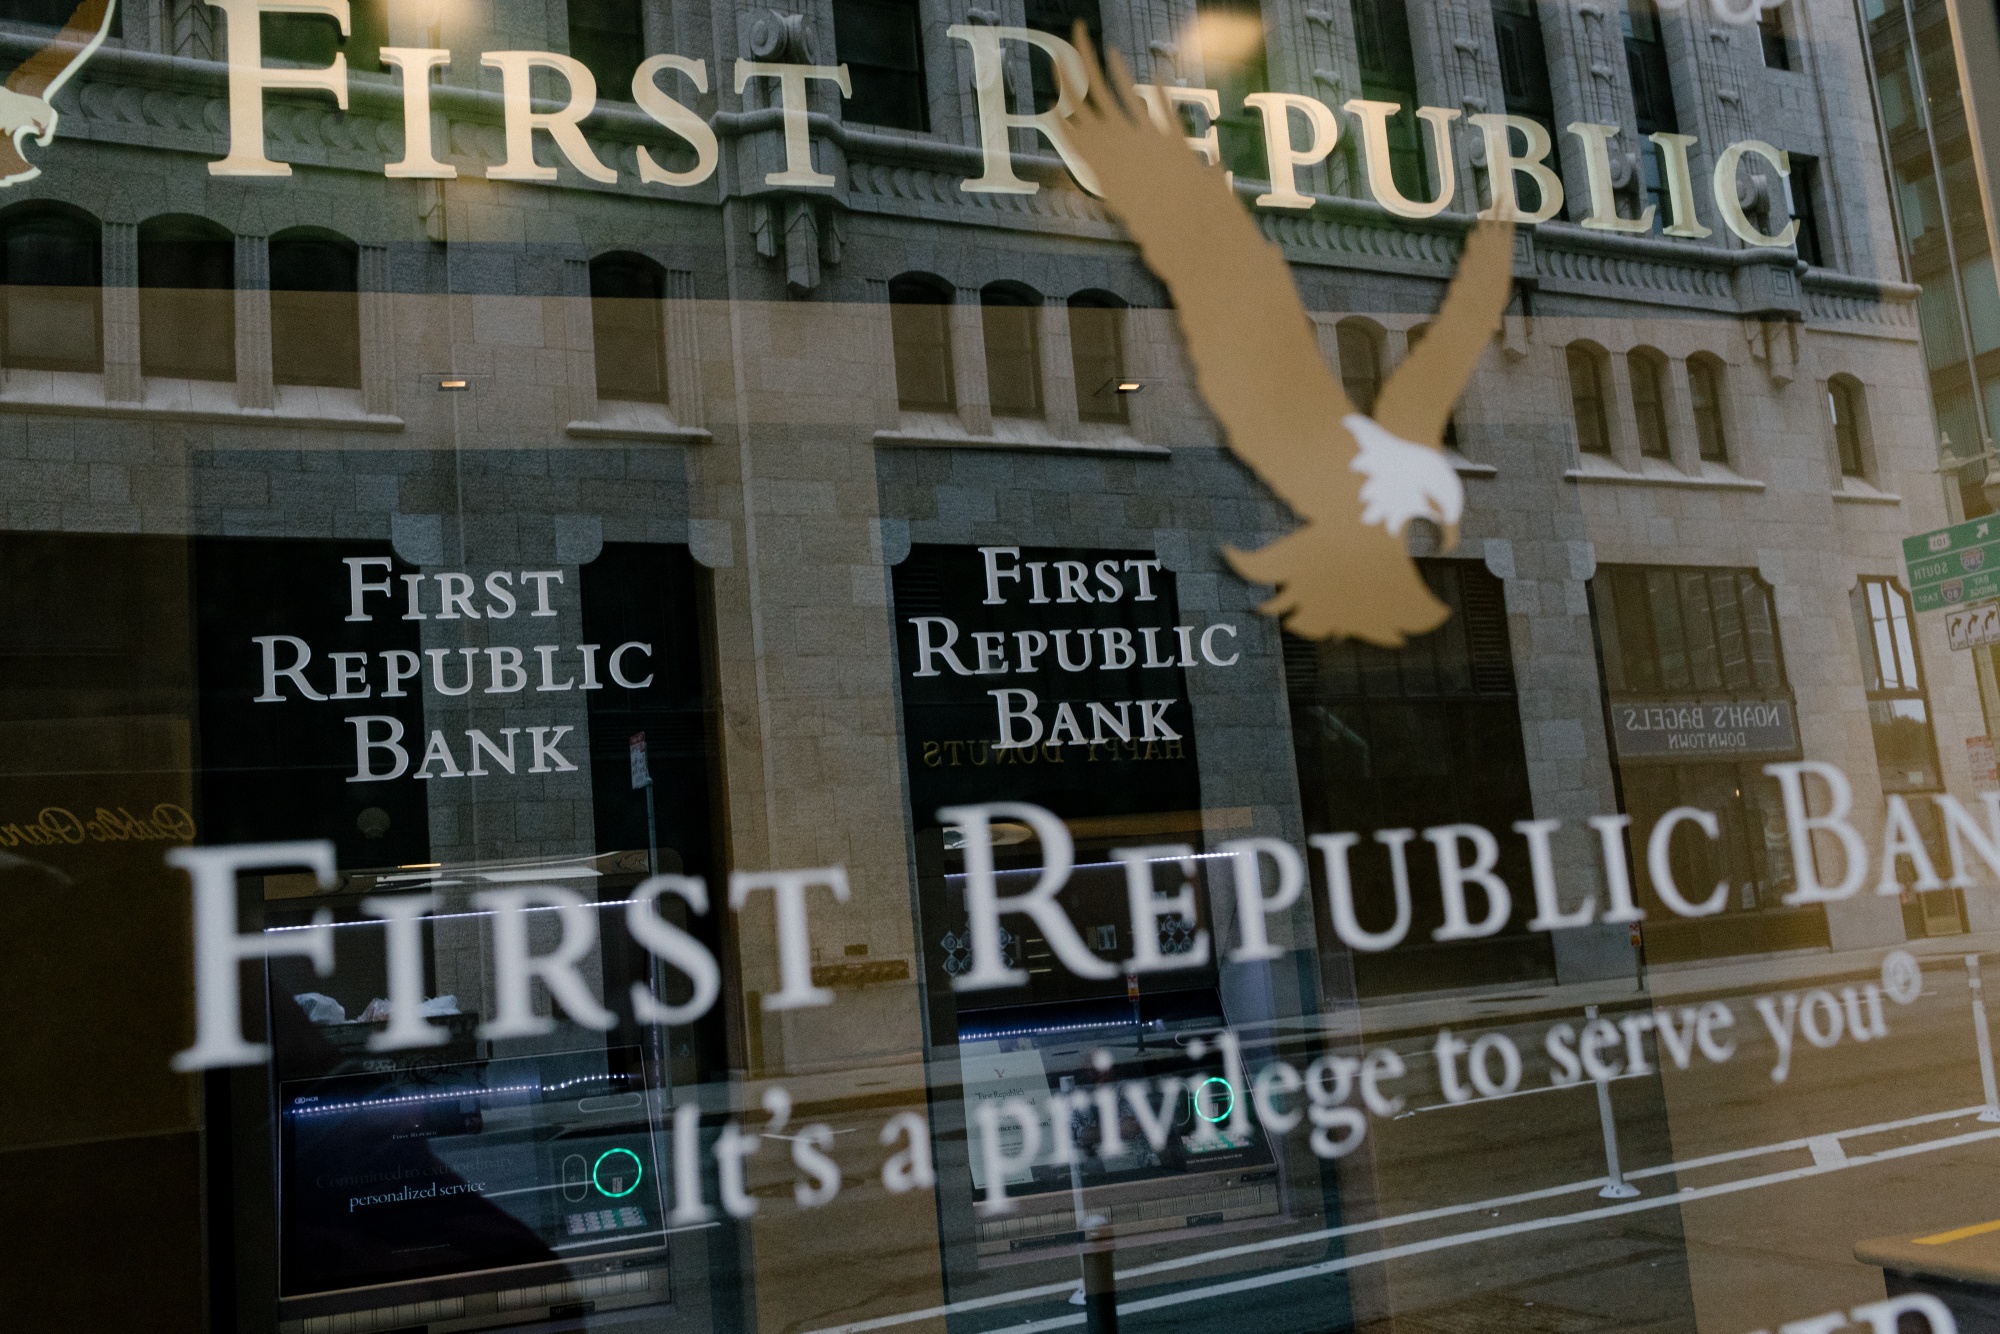 The First Republic Bank headquarters in San Francisco.